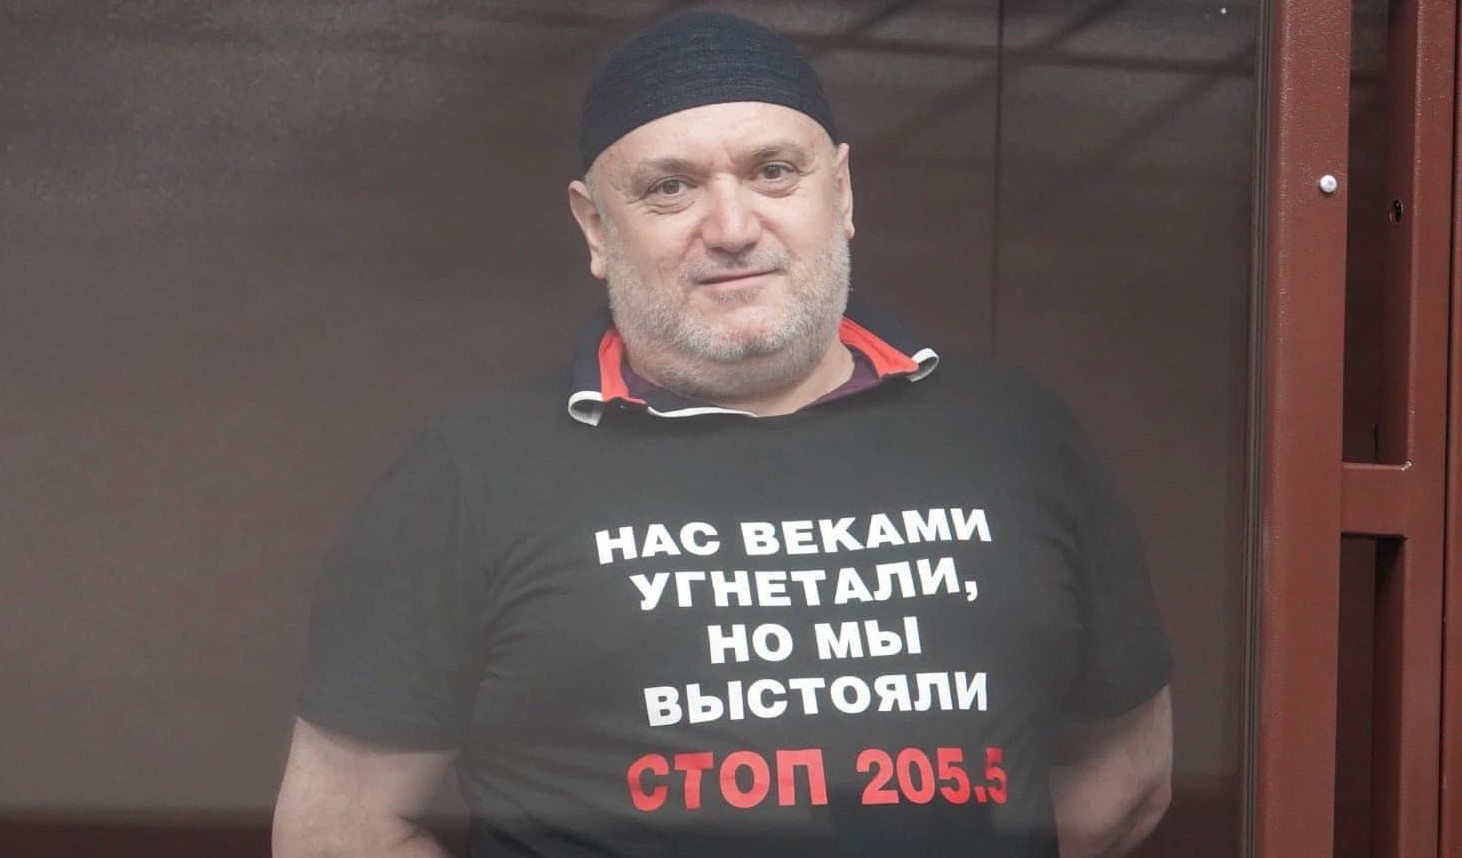 Ansar Osmanov in court in a T-shirt reading ’We’ve been oppressed for centuries, but we withstood. STOP 205.5 (the fabricated charges used in these cases) Photo Crimean Solidarity